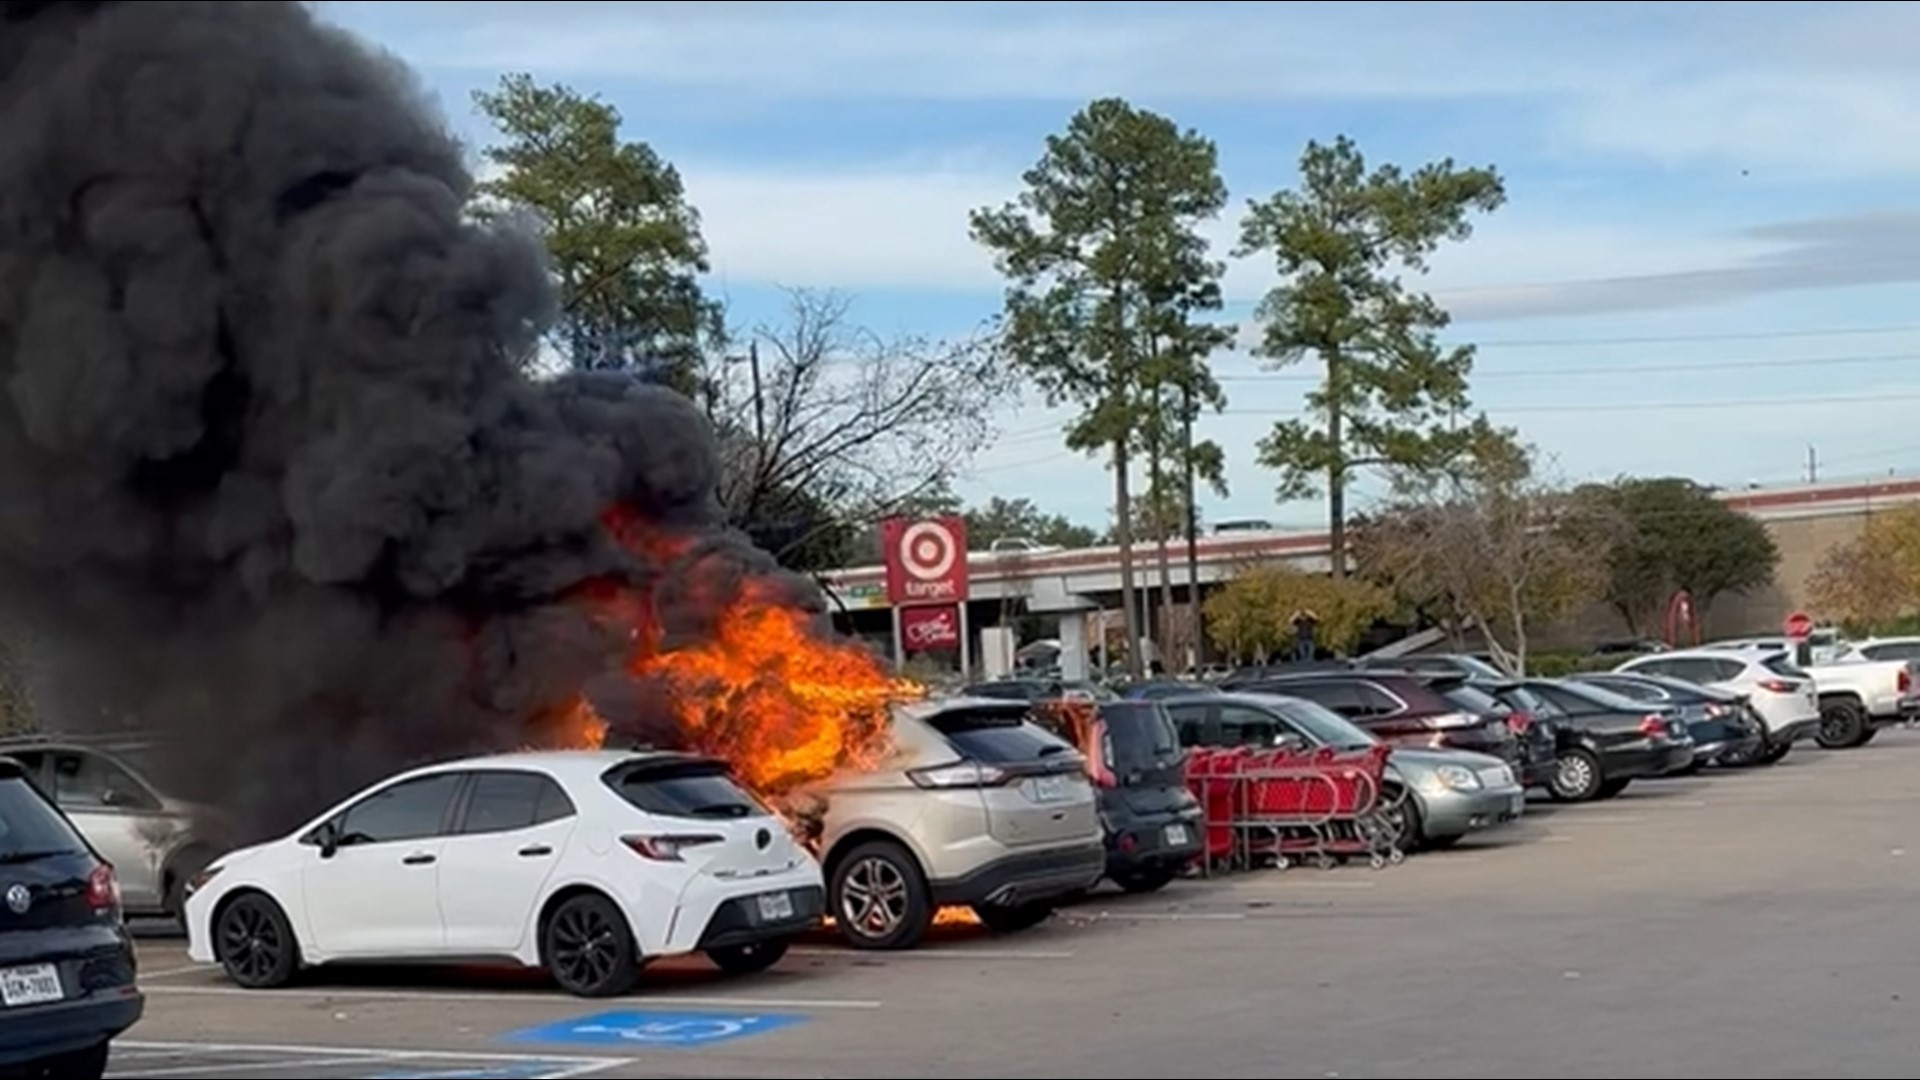 The Cypress Creek Fire Department and Precinct 4 Constable deputies responded to the fire at the Target on Tomball Parkway in NW Harris County.